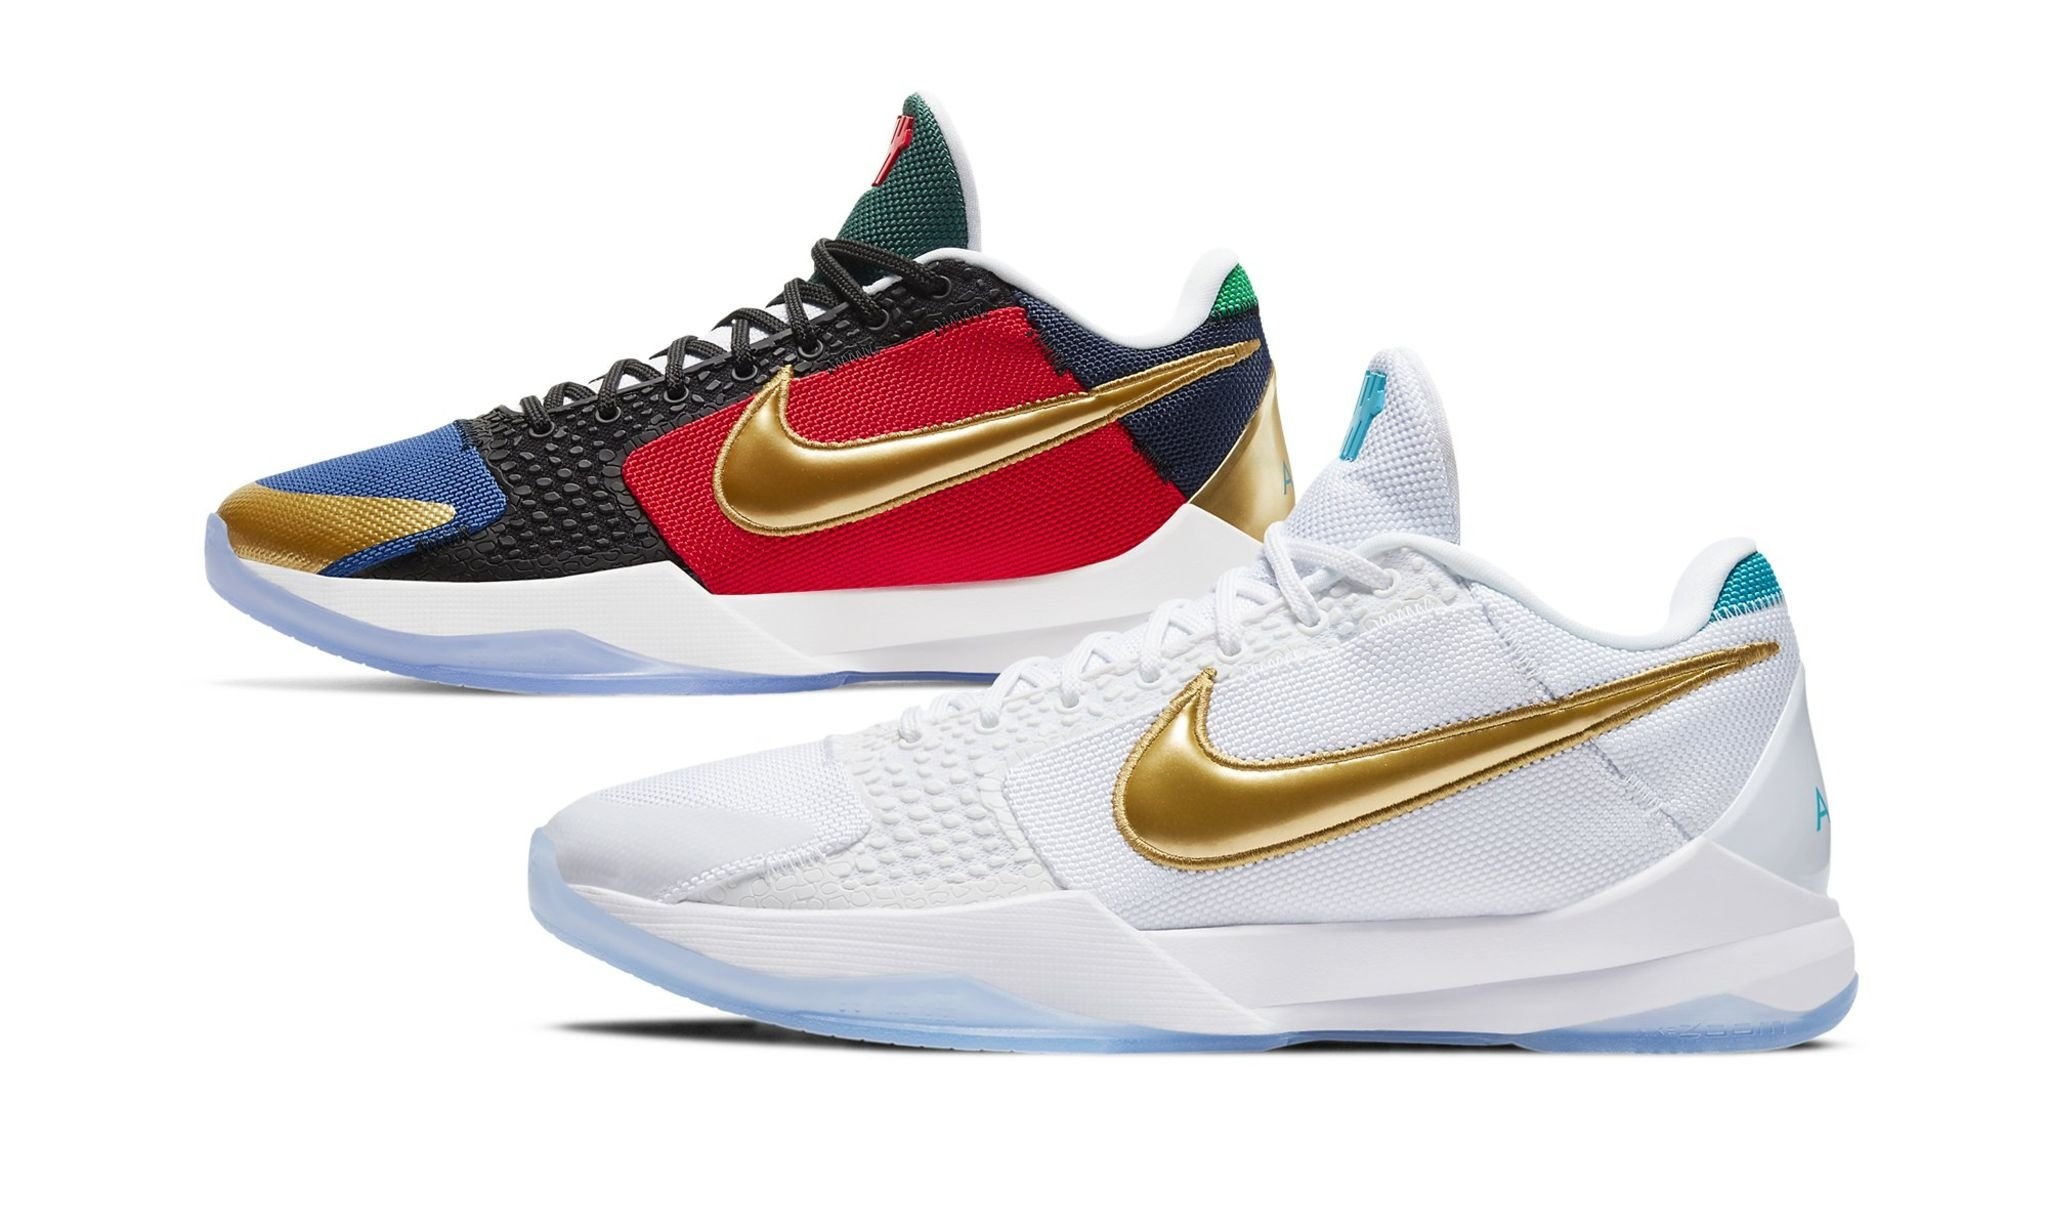 Kobe 5 Protro x Undefeated "What If Pack" - 2